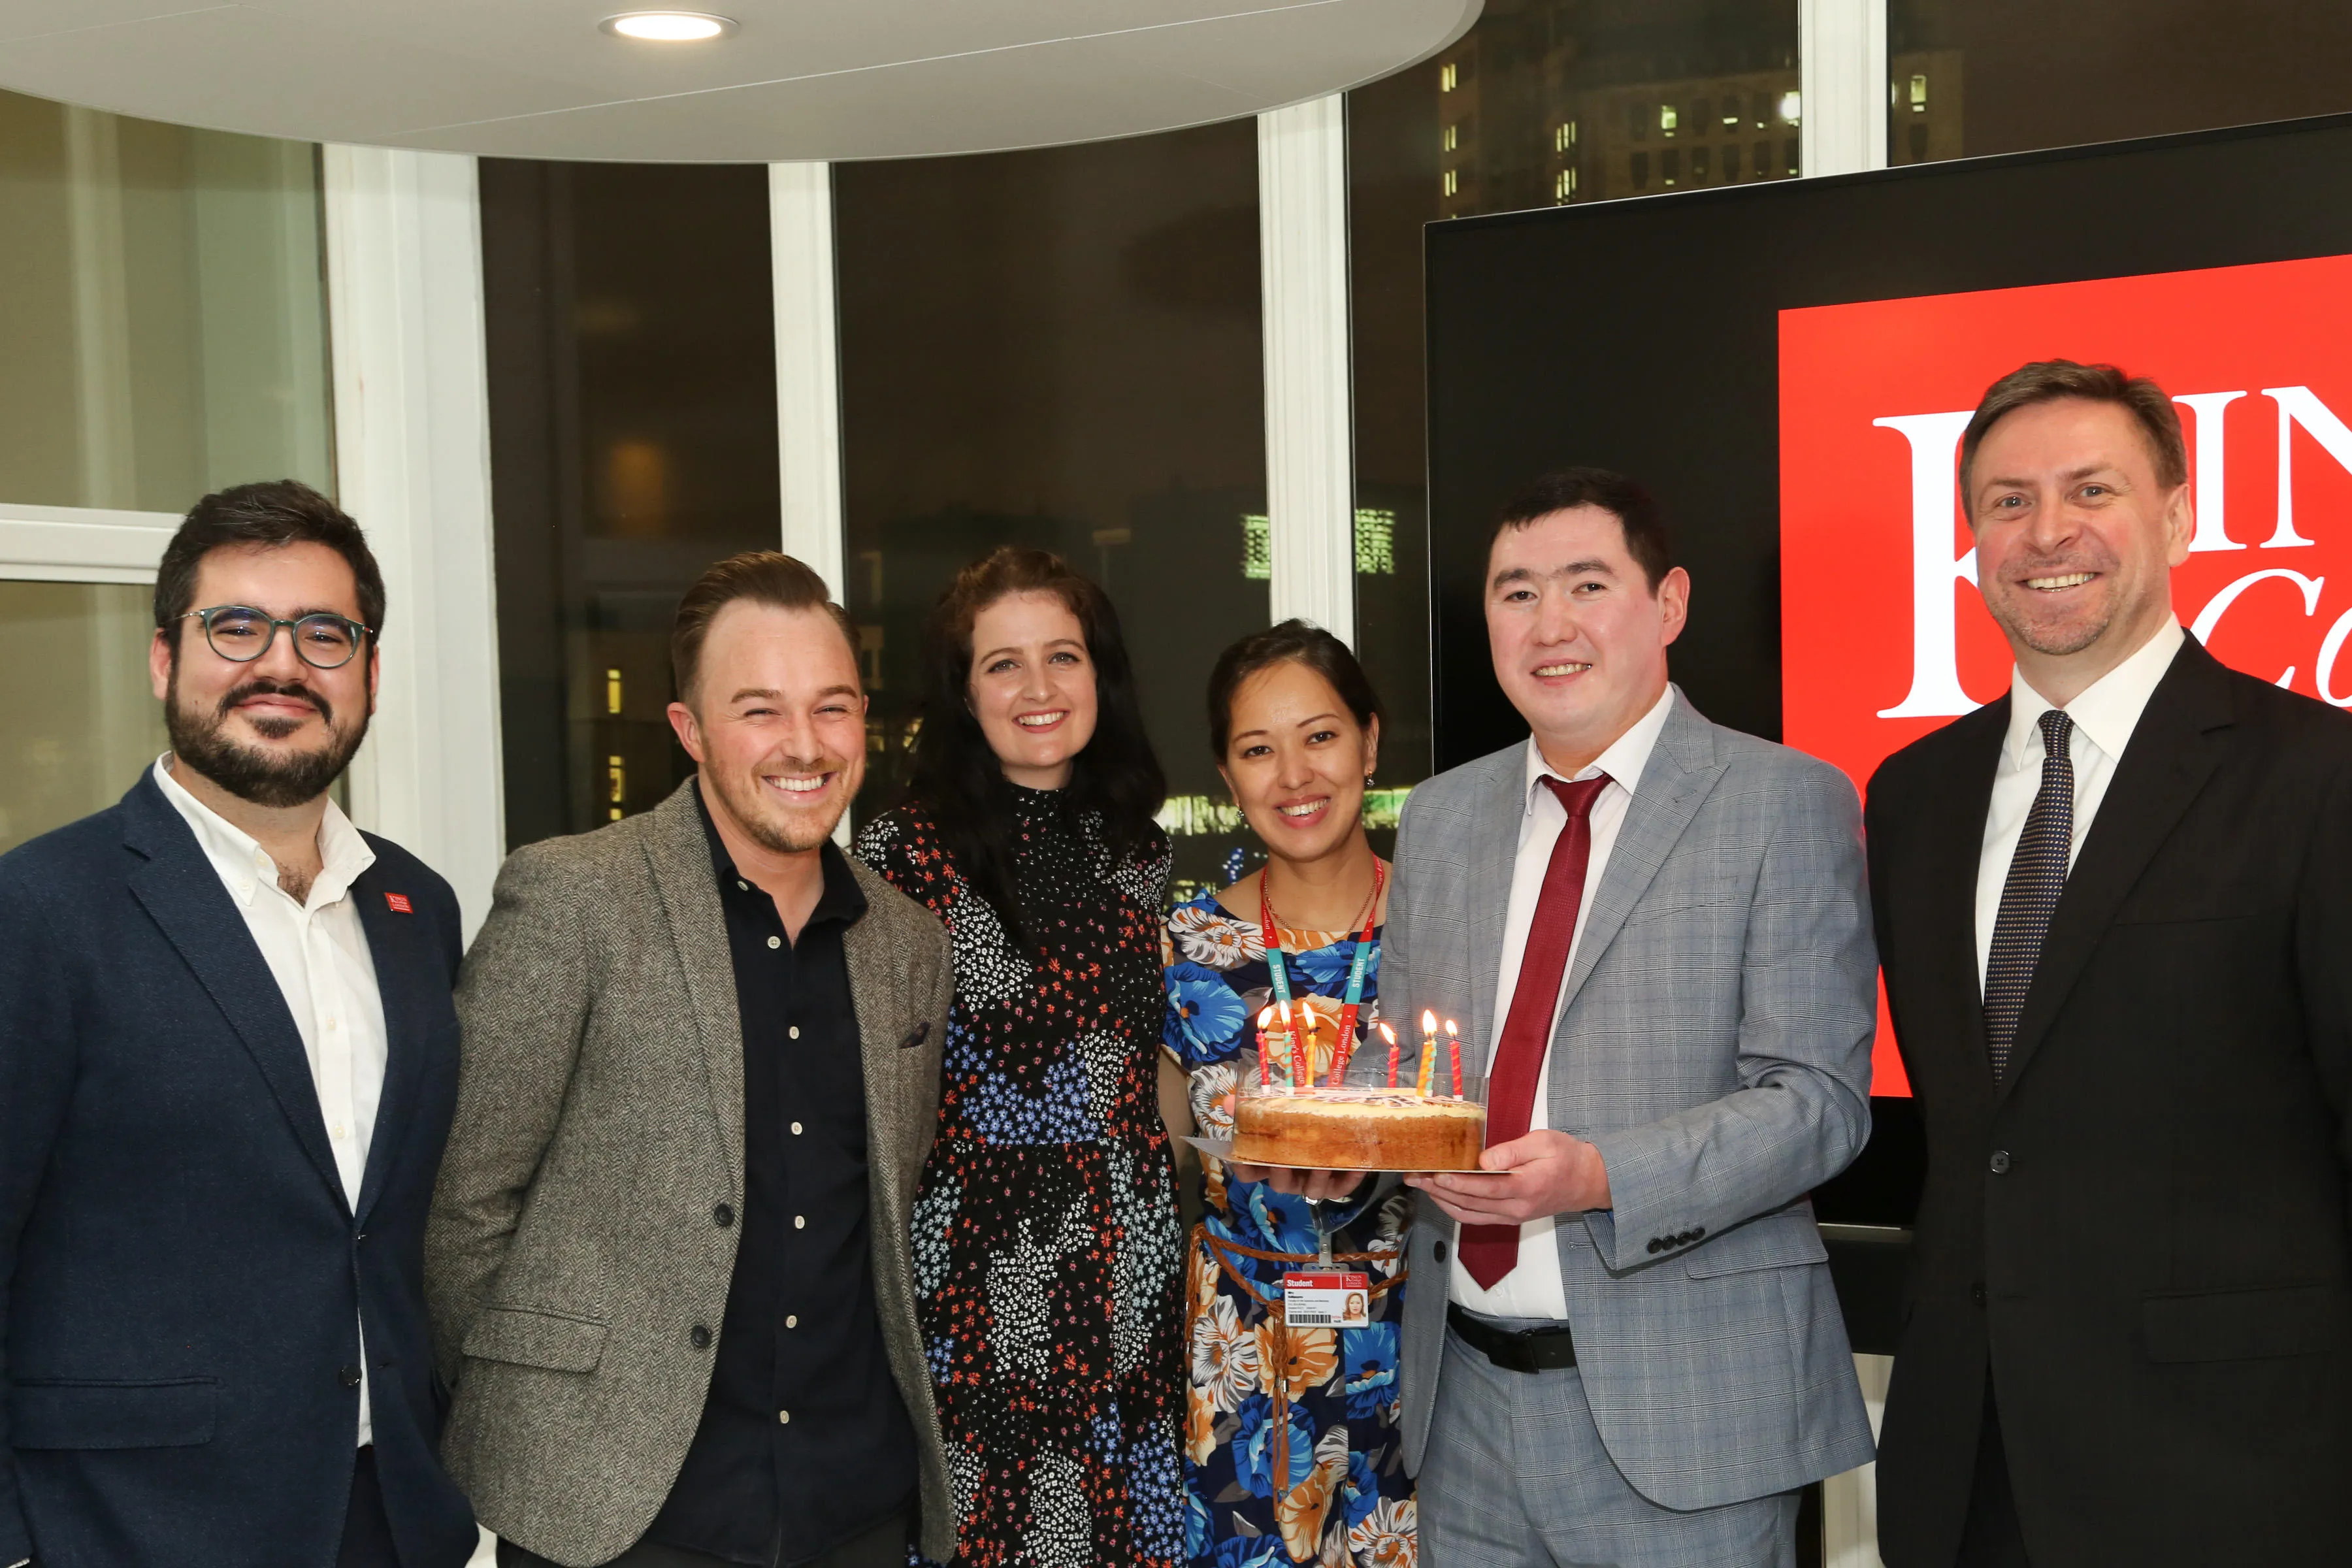 Scholars presenting a home-made cake to the programme staff and the Project Lead, Mr Yury Bikbaev (far right).